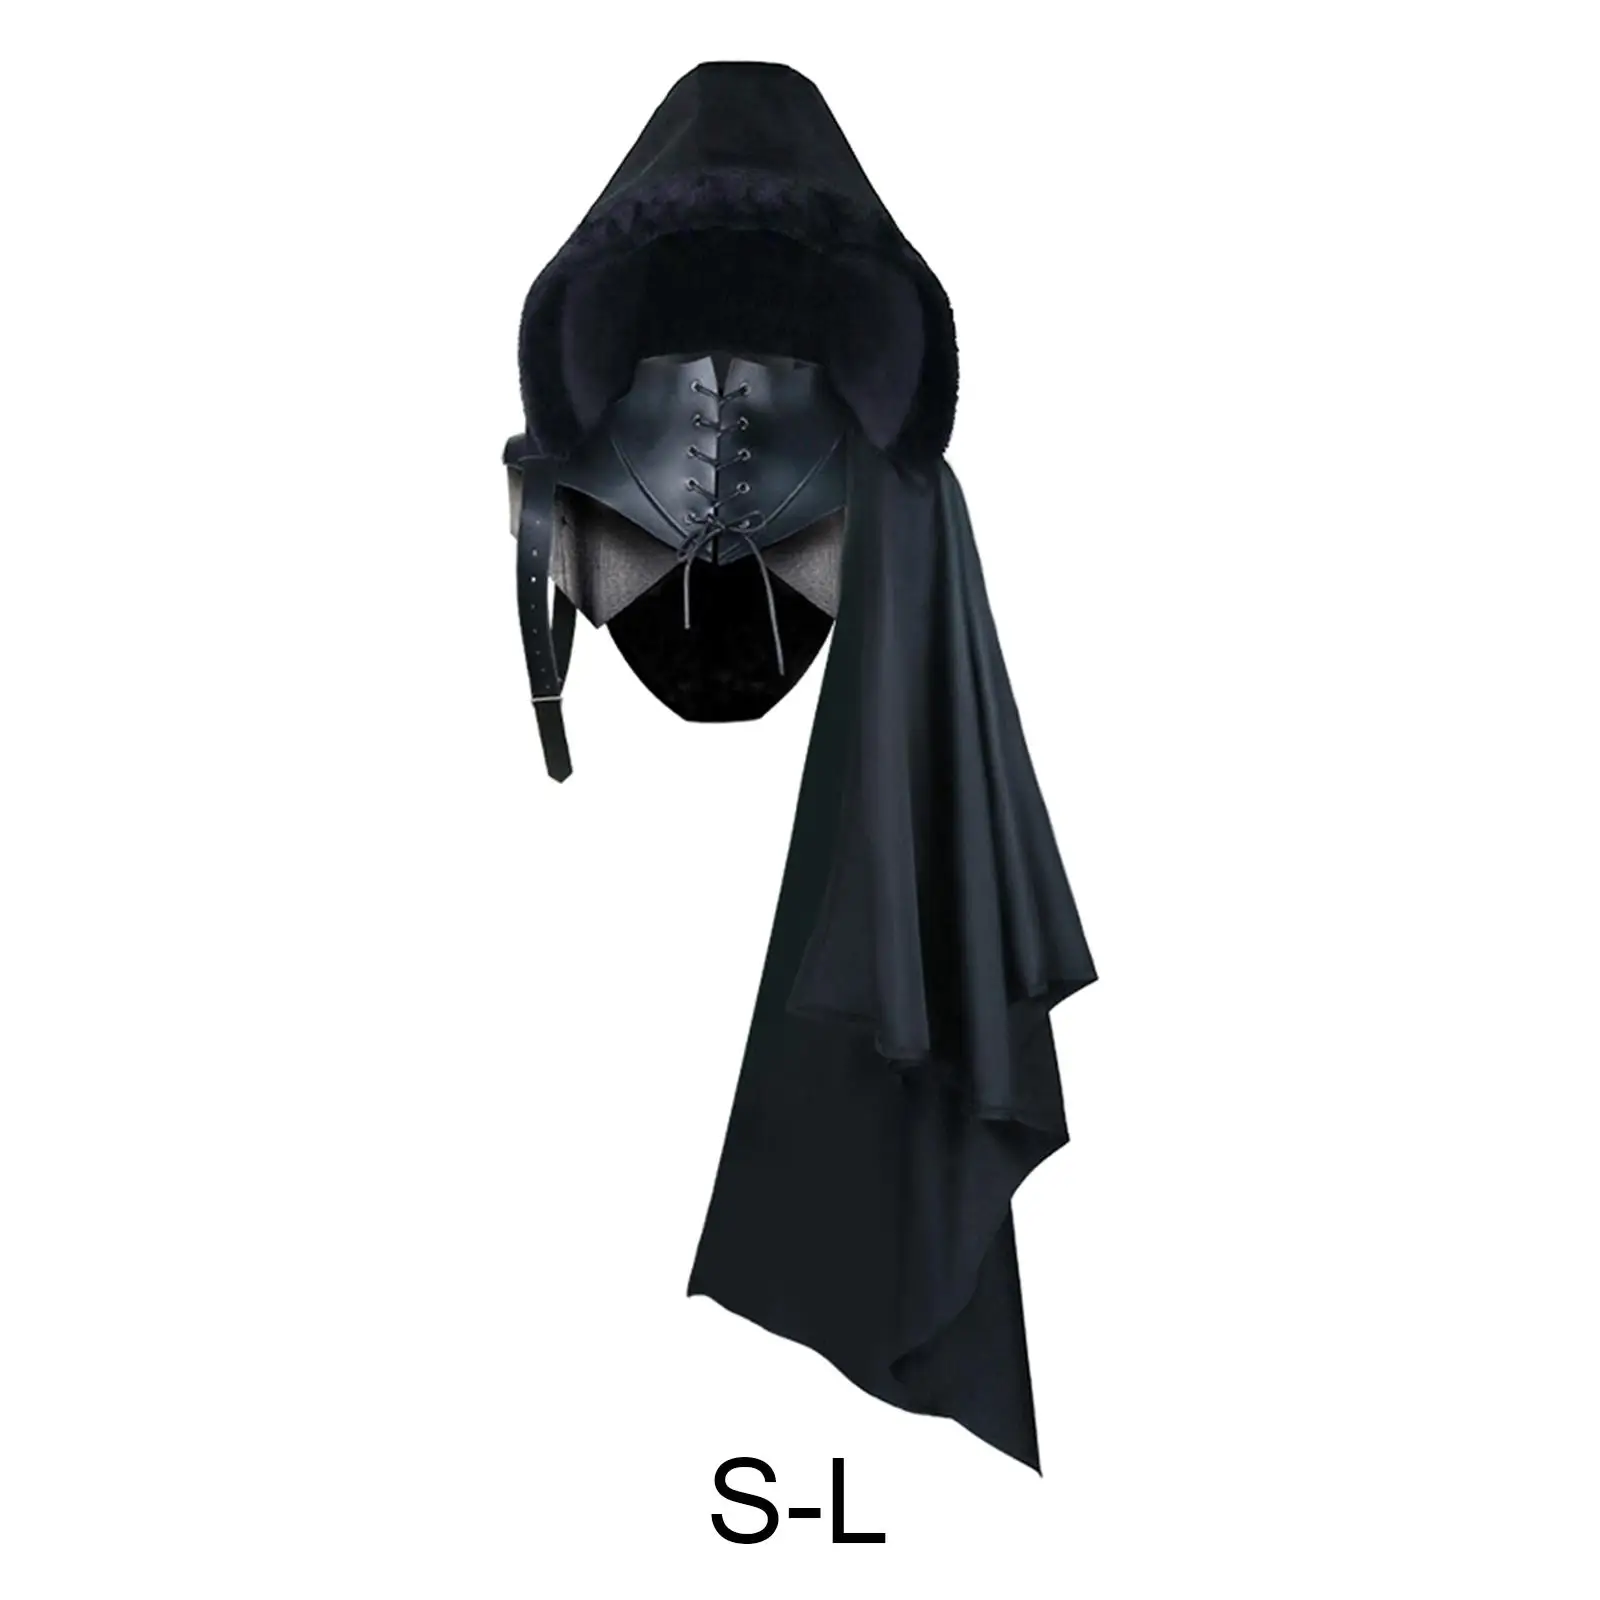 Black Cape Cloak with Buckle Straps Uniform Gothic Adult Punk Hooded Cape Medieval Cloak Cosplay Costume